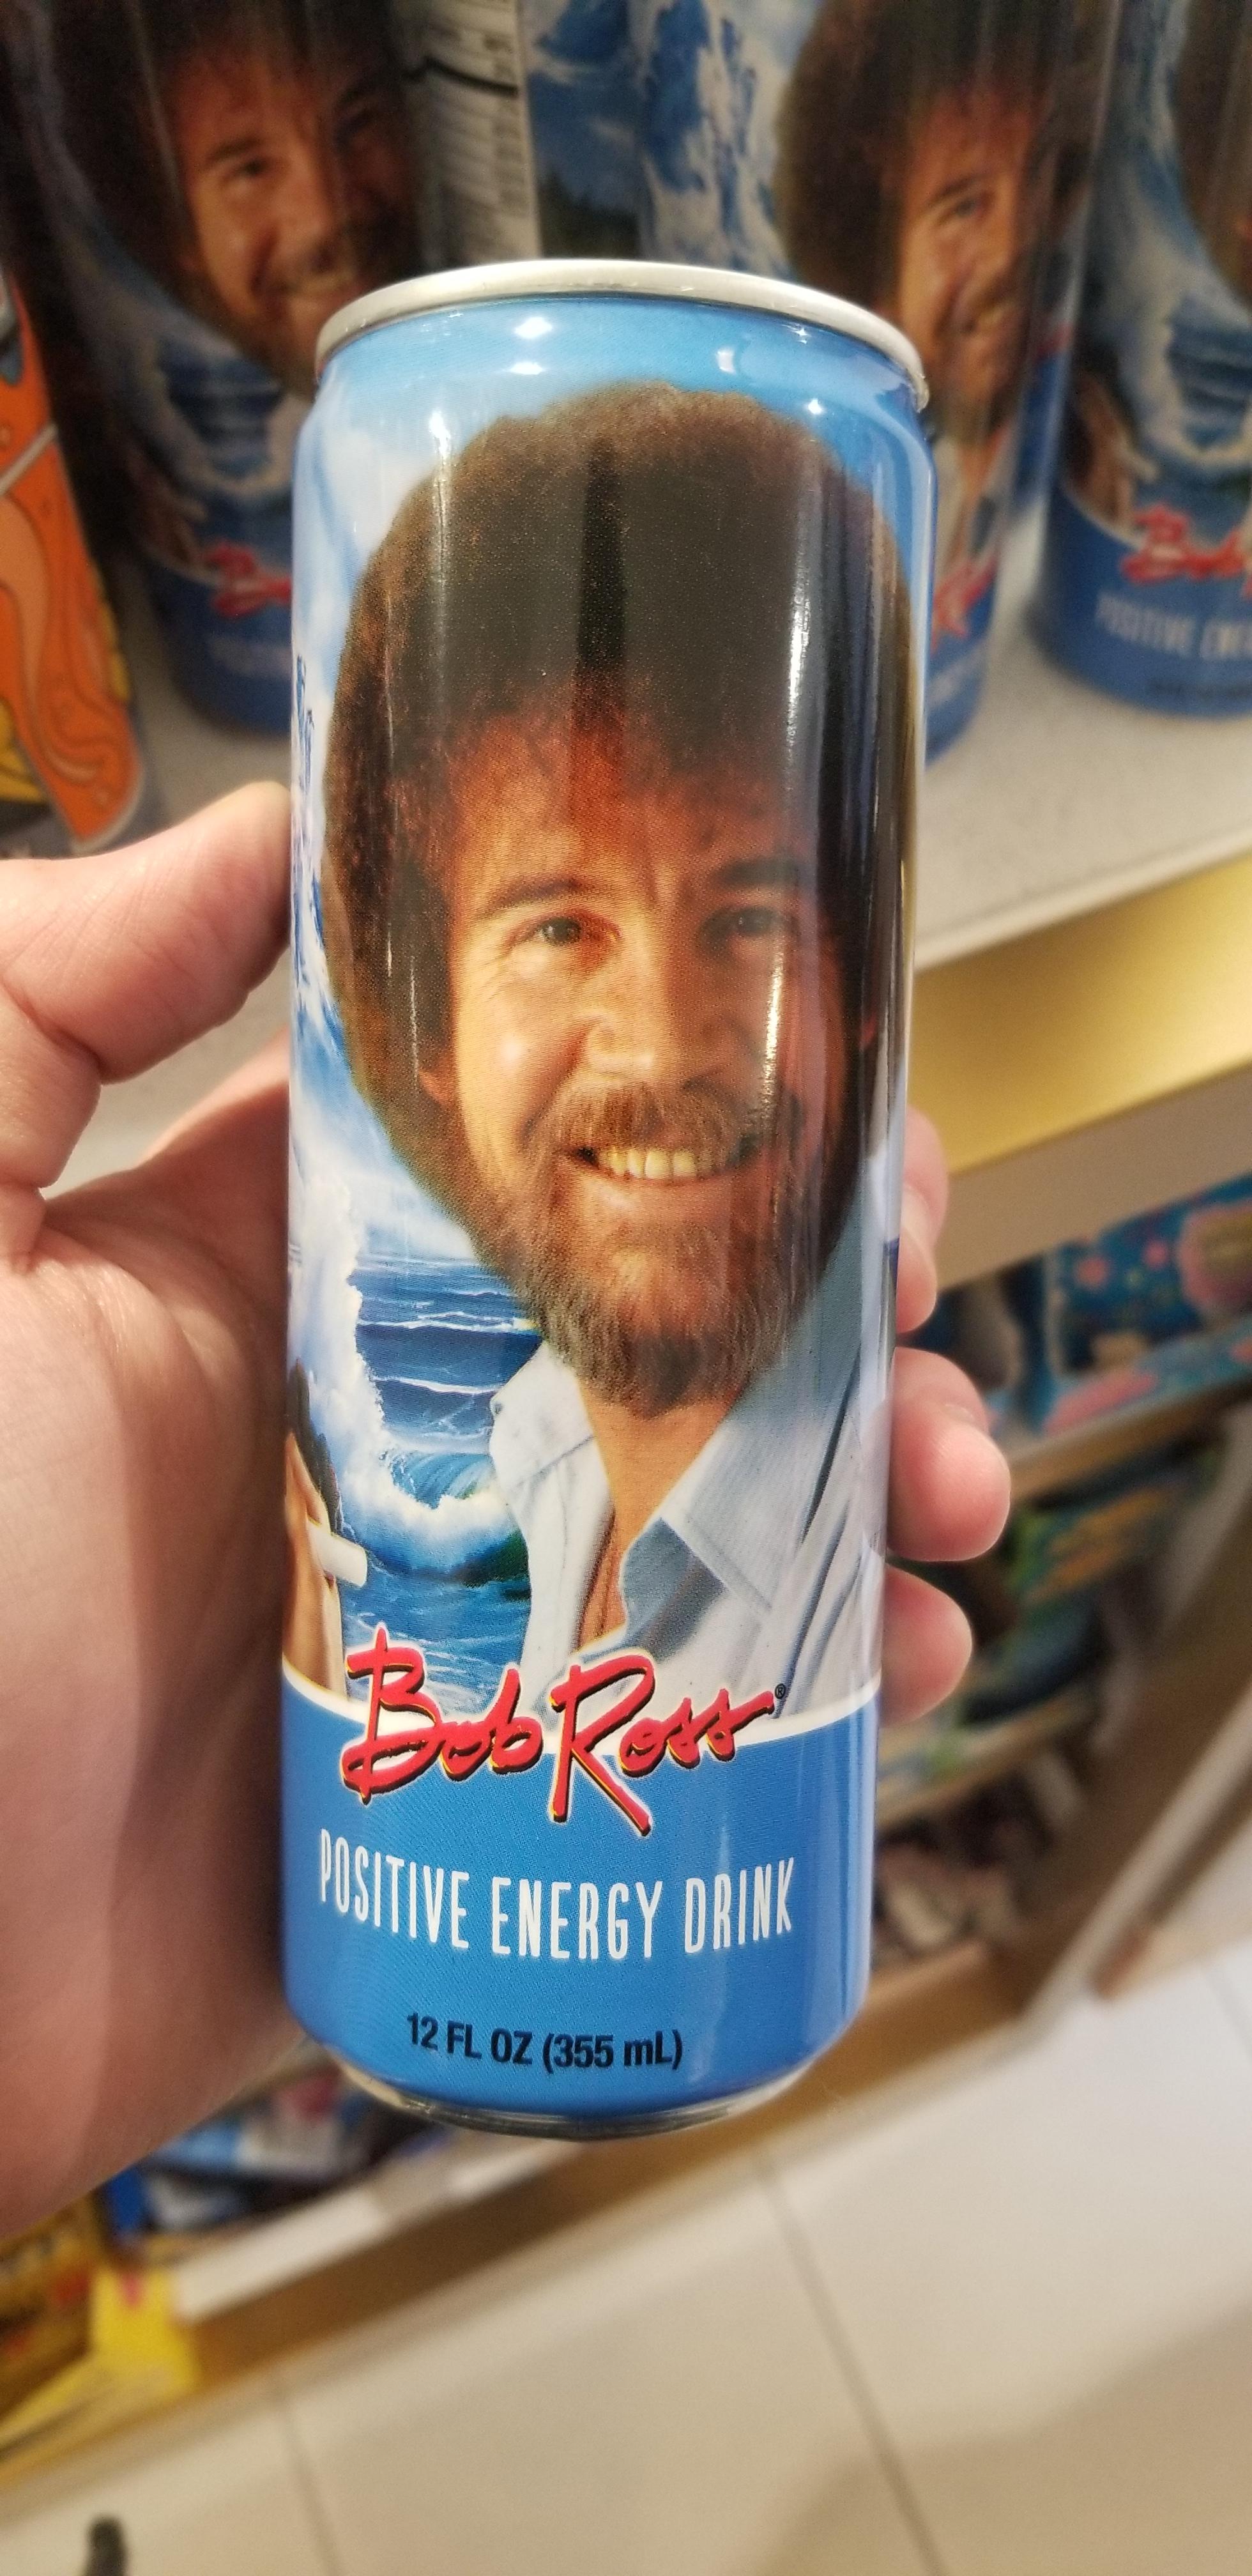 This Bob Ross energy drink